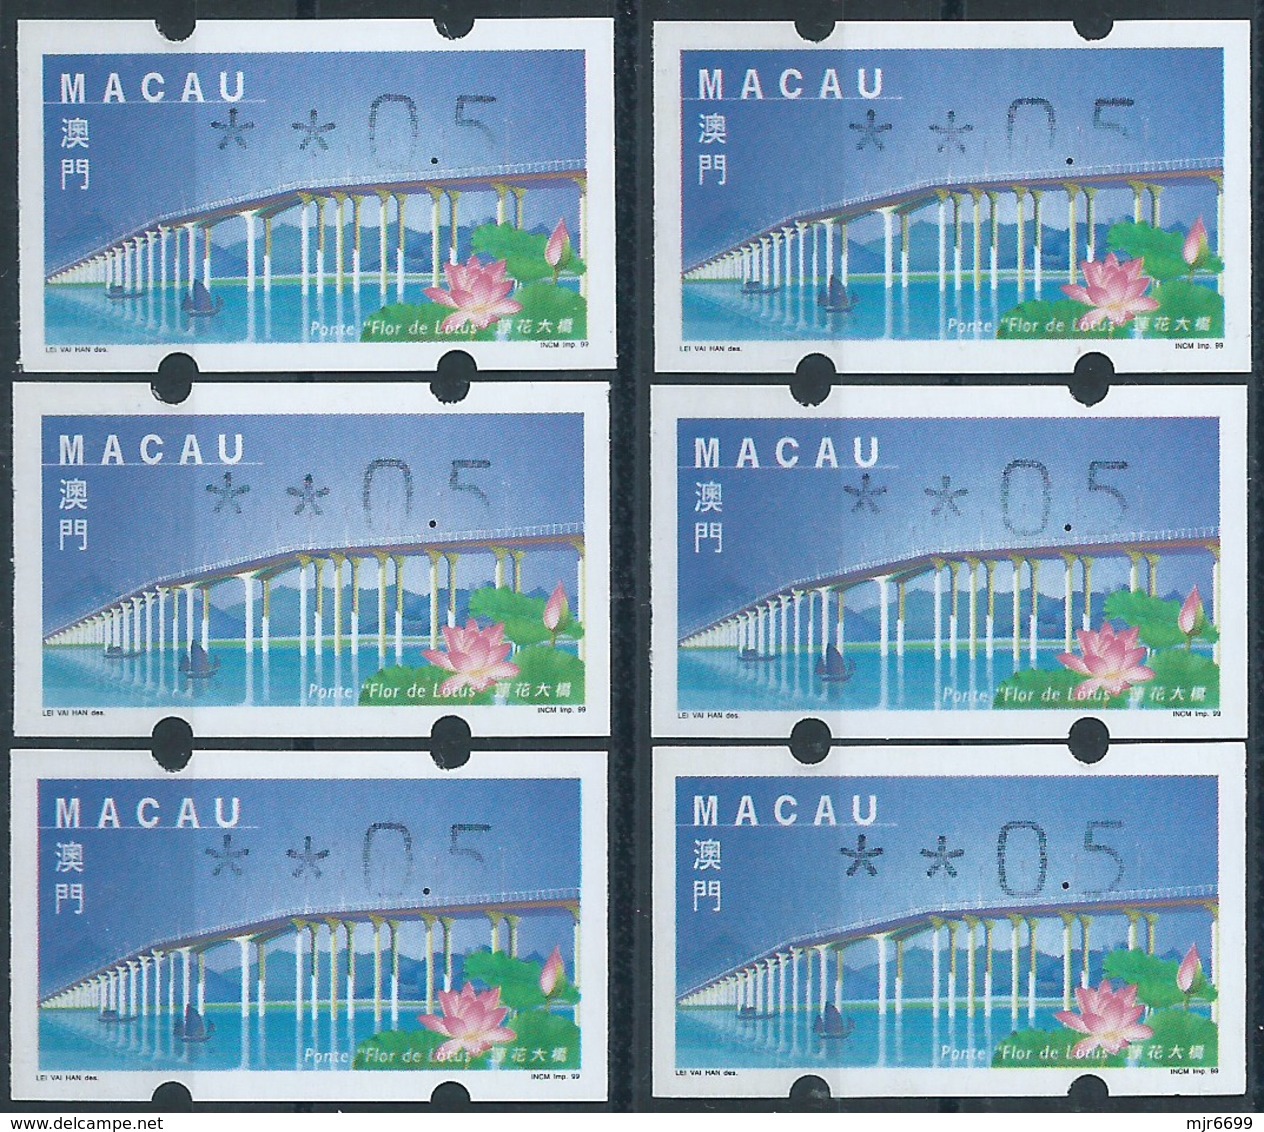 MACAU ATM LABELS, 1999 LOTUS FLOWER BRIDGE ISSUE, 50 AVOS WITH VALUE HALF PRINTED LOT OF 5 + 1 NORMAL FOR COMPARE - Distributors